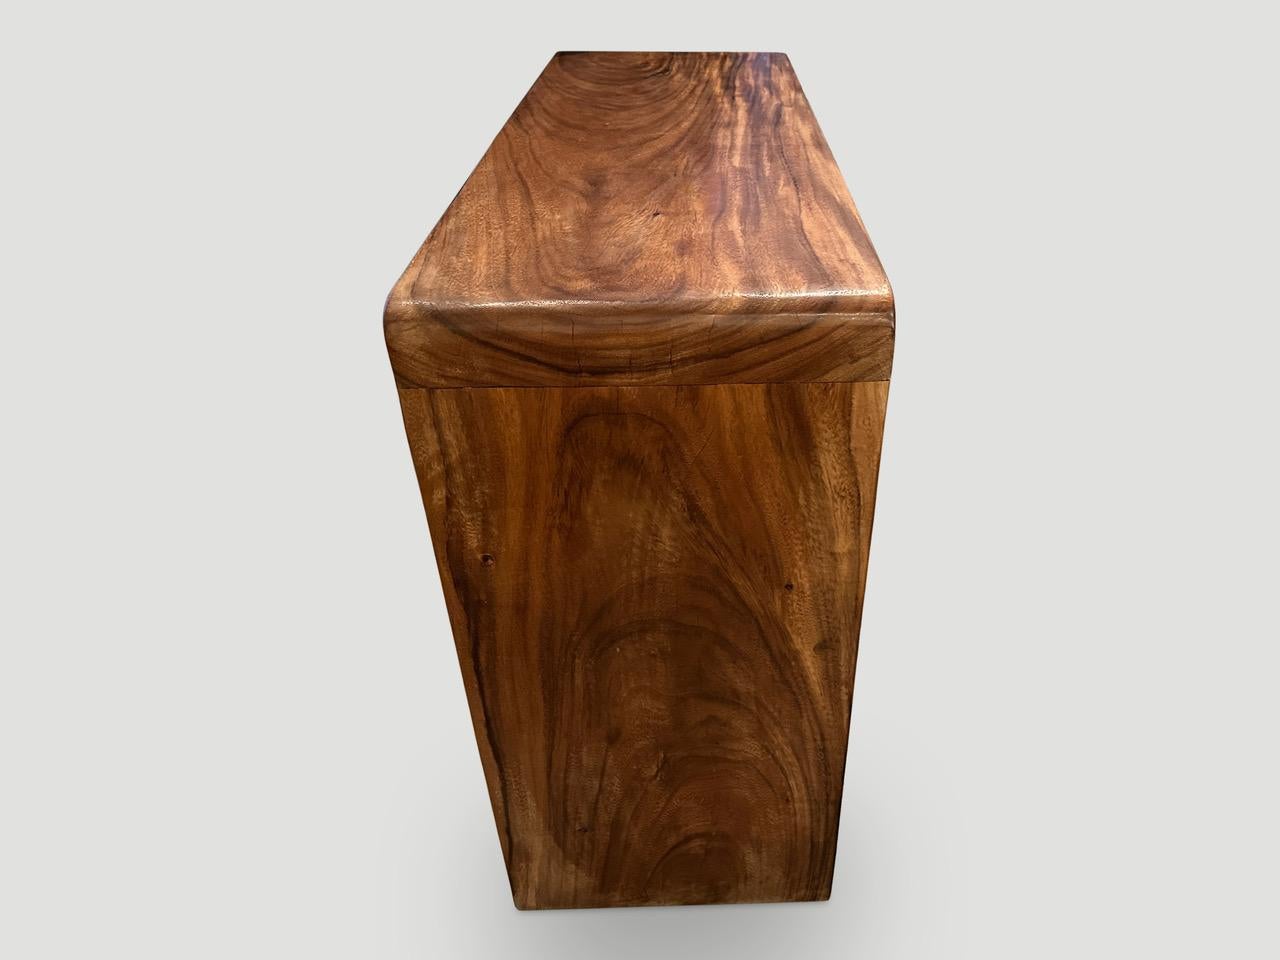 Impressive minimalist console table hand made from reclaimed Suar wood with butterfly detail on the leg, as shown in the final images. Each panel is three inches thick. Finished in a natural oil revealing the beautiful wood grain.
Custom stains and